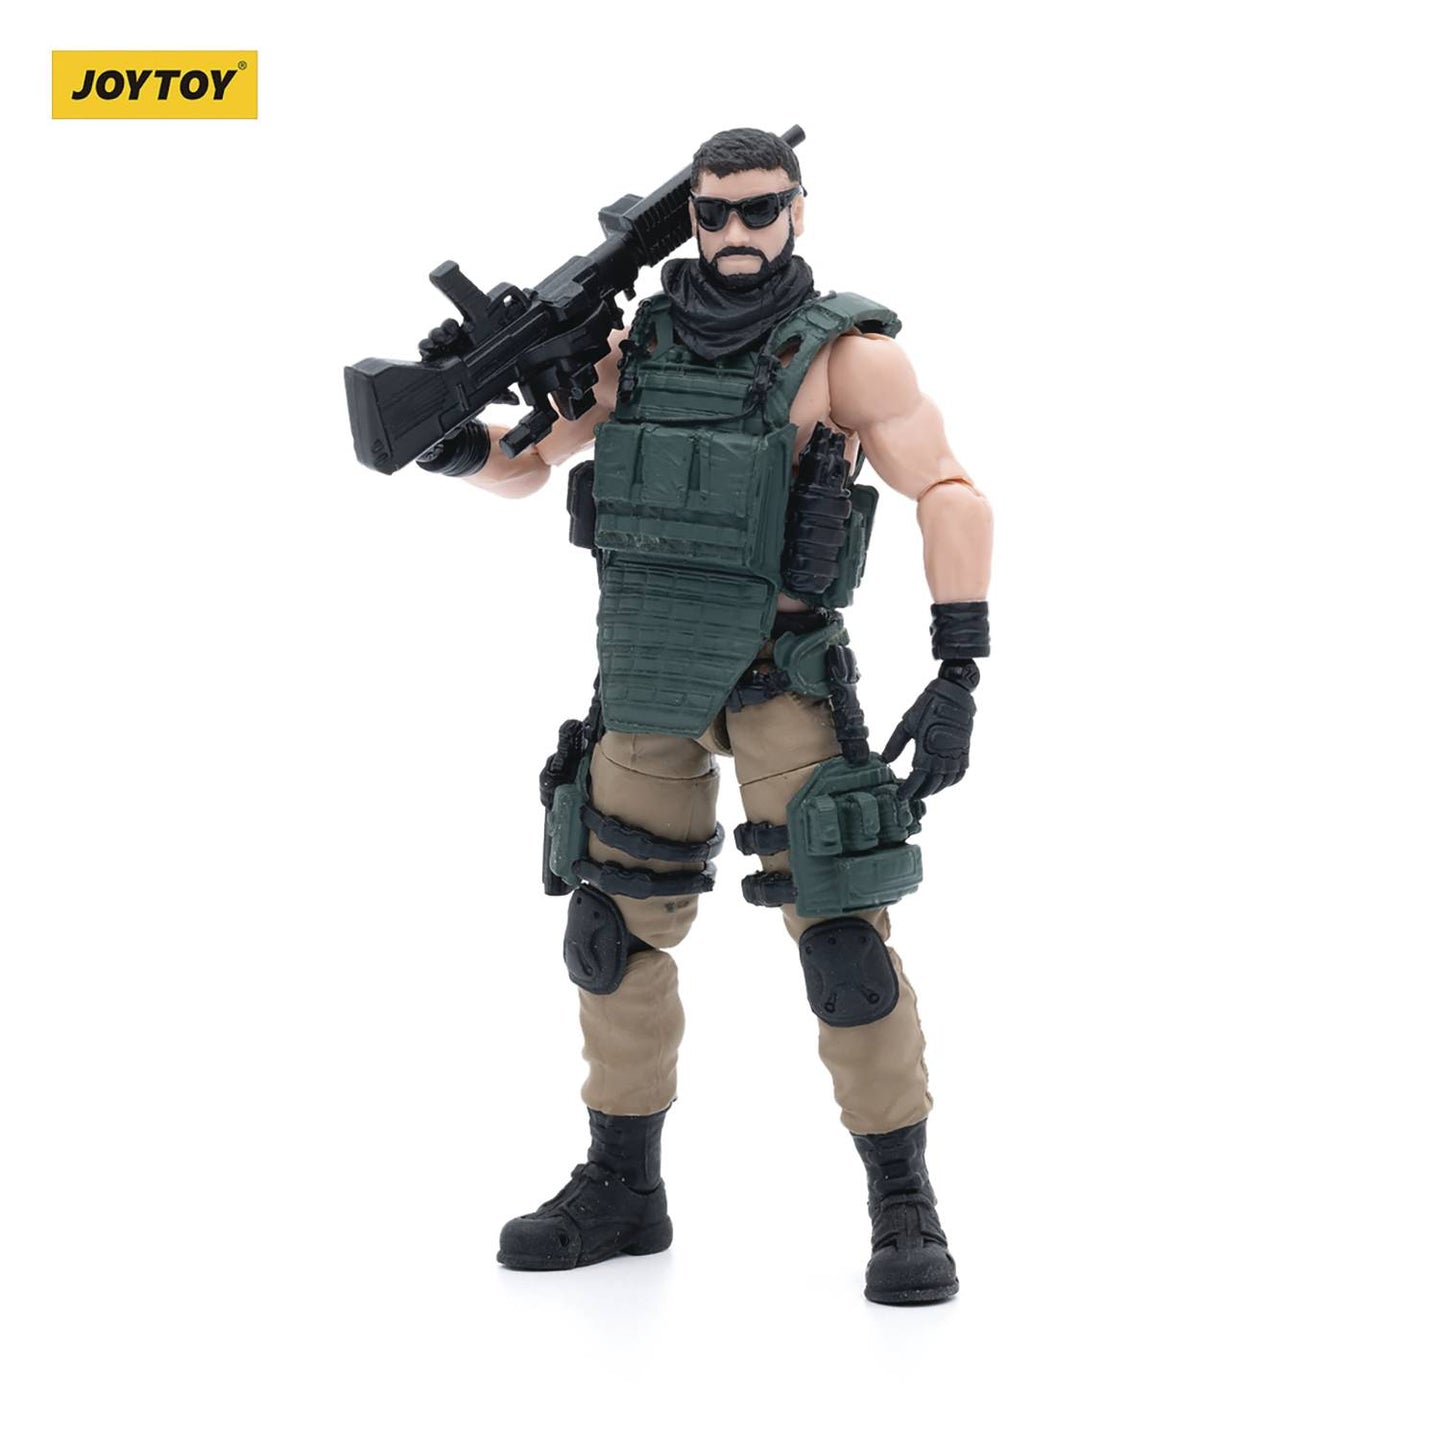 JOYTOY YEARLY ARMY BUILDER PROMOTION PACK FIGURE 01 1/18 FIG